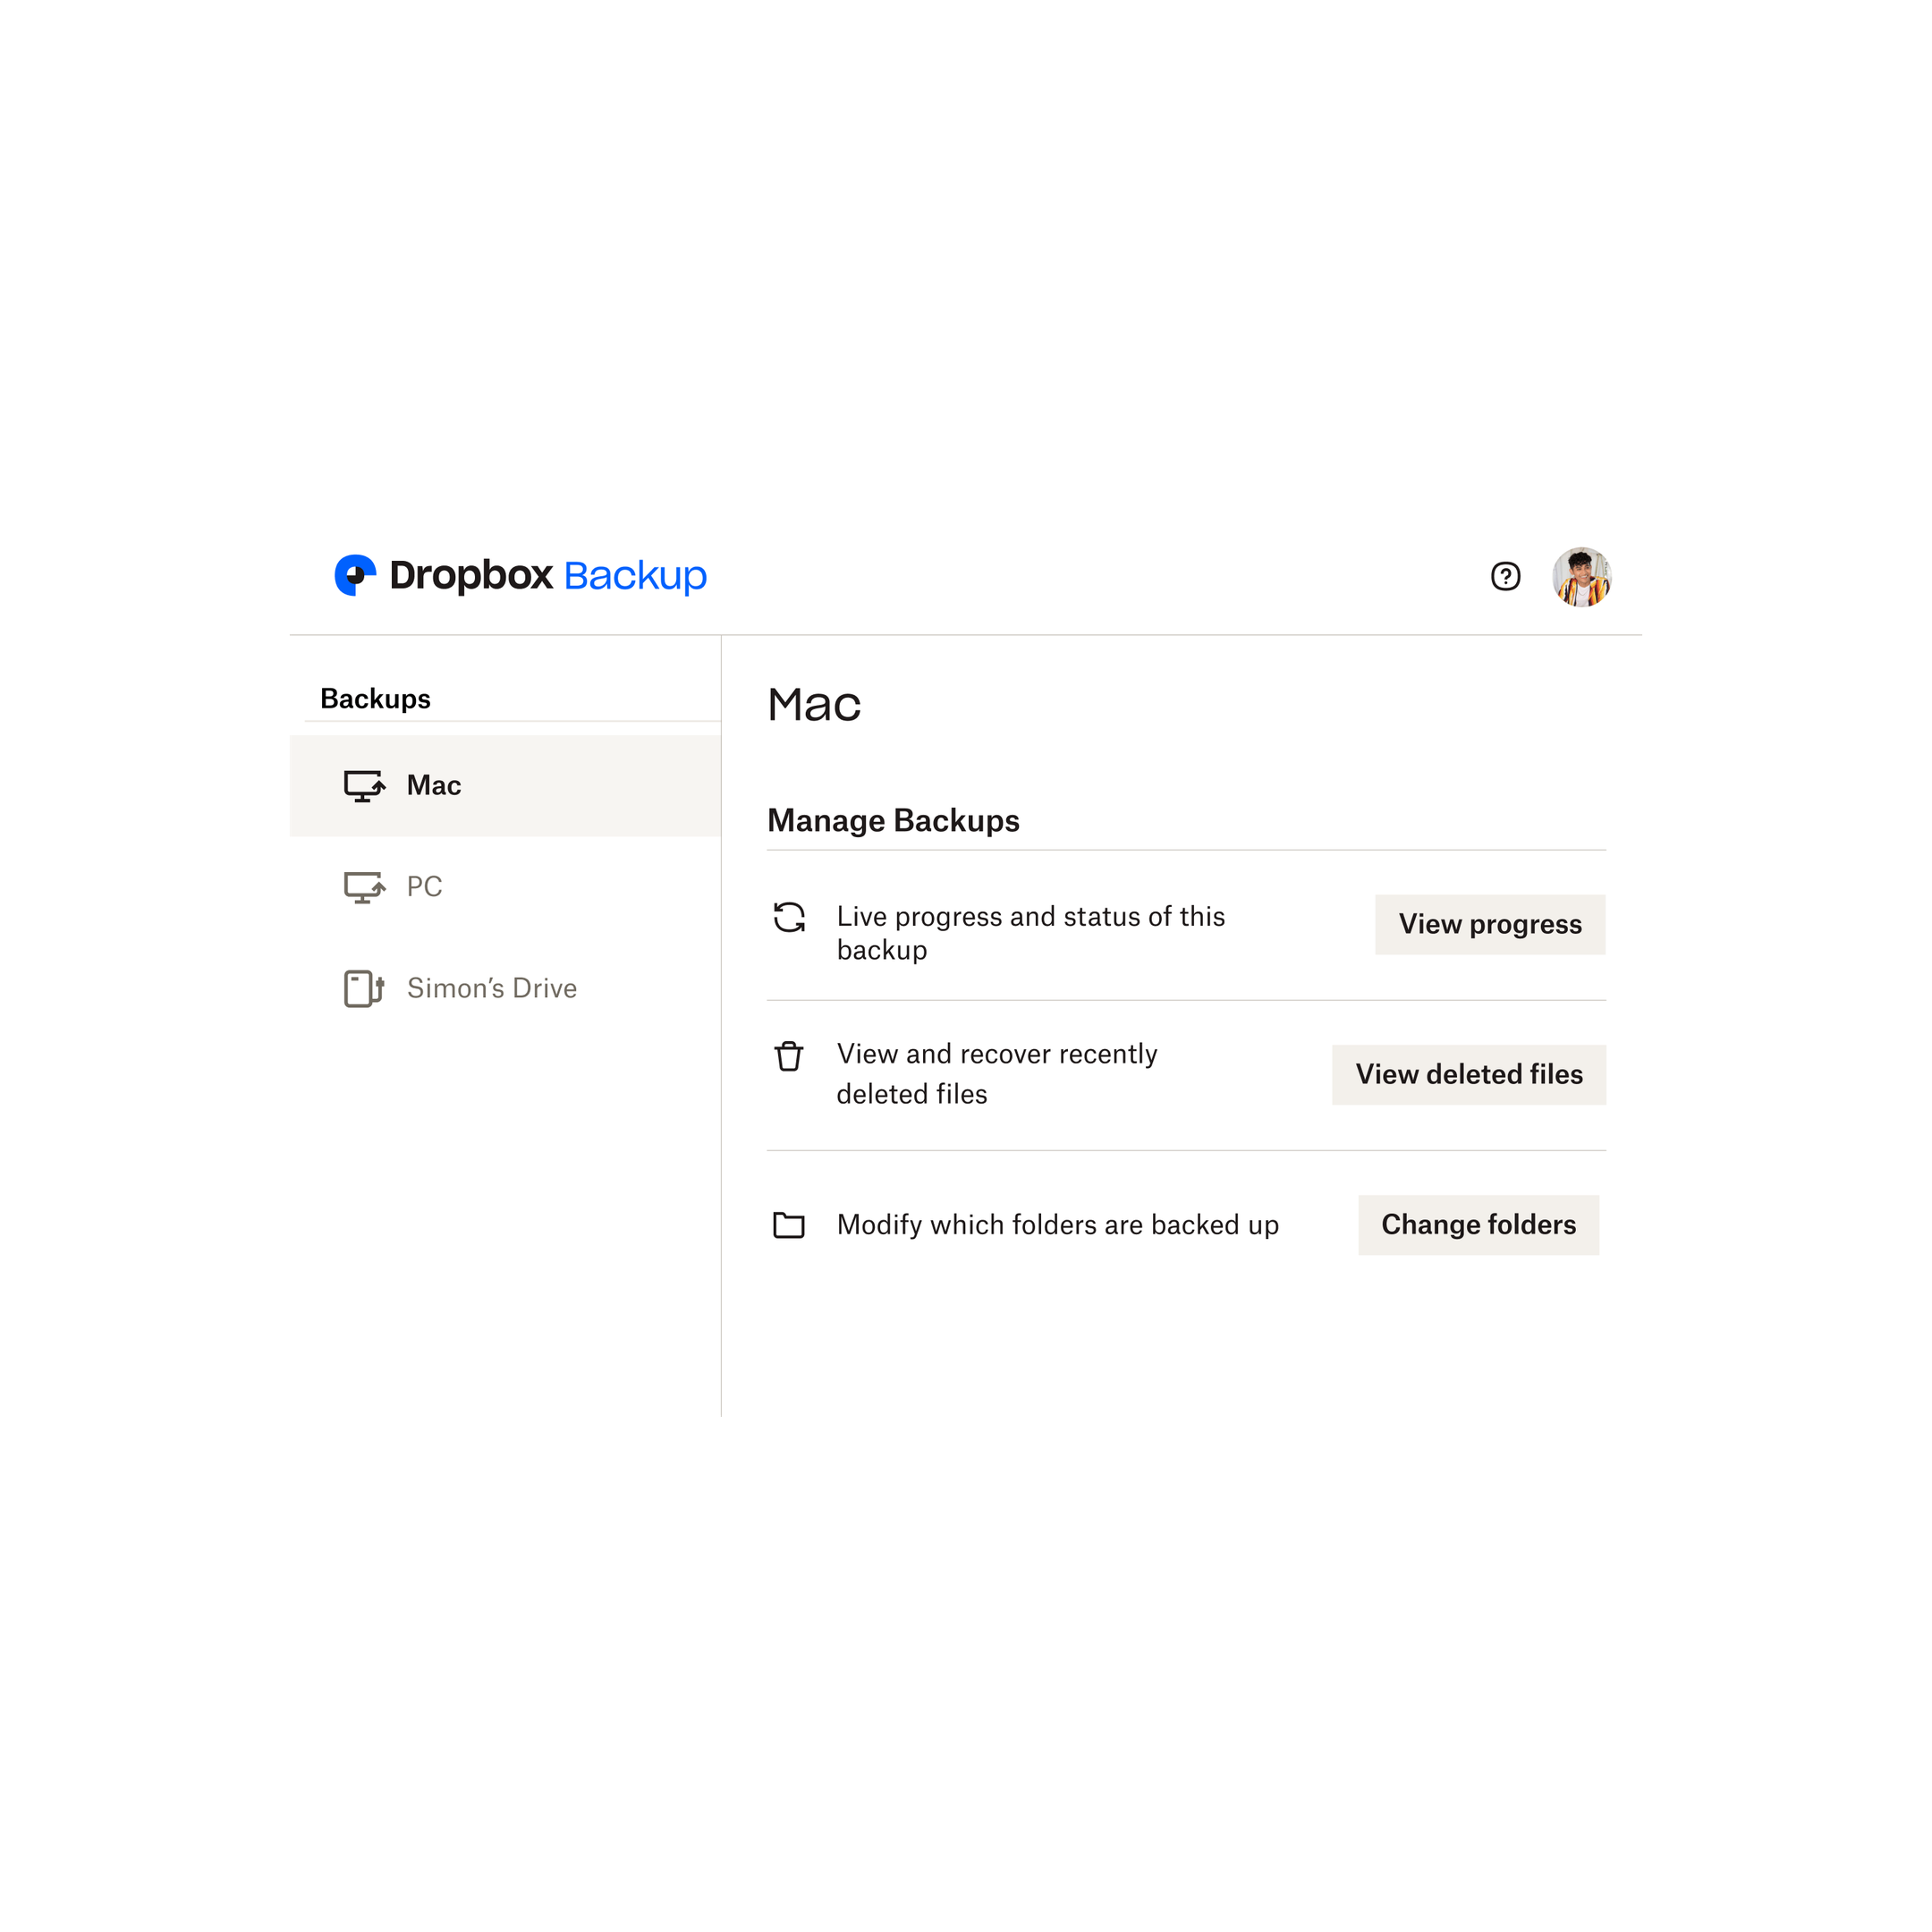 The menu for Dropbox Backup management that includes the ability to view backup status, view and recover deleted files, and to change which folders are backed up